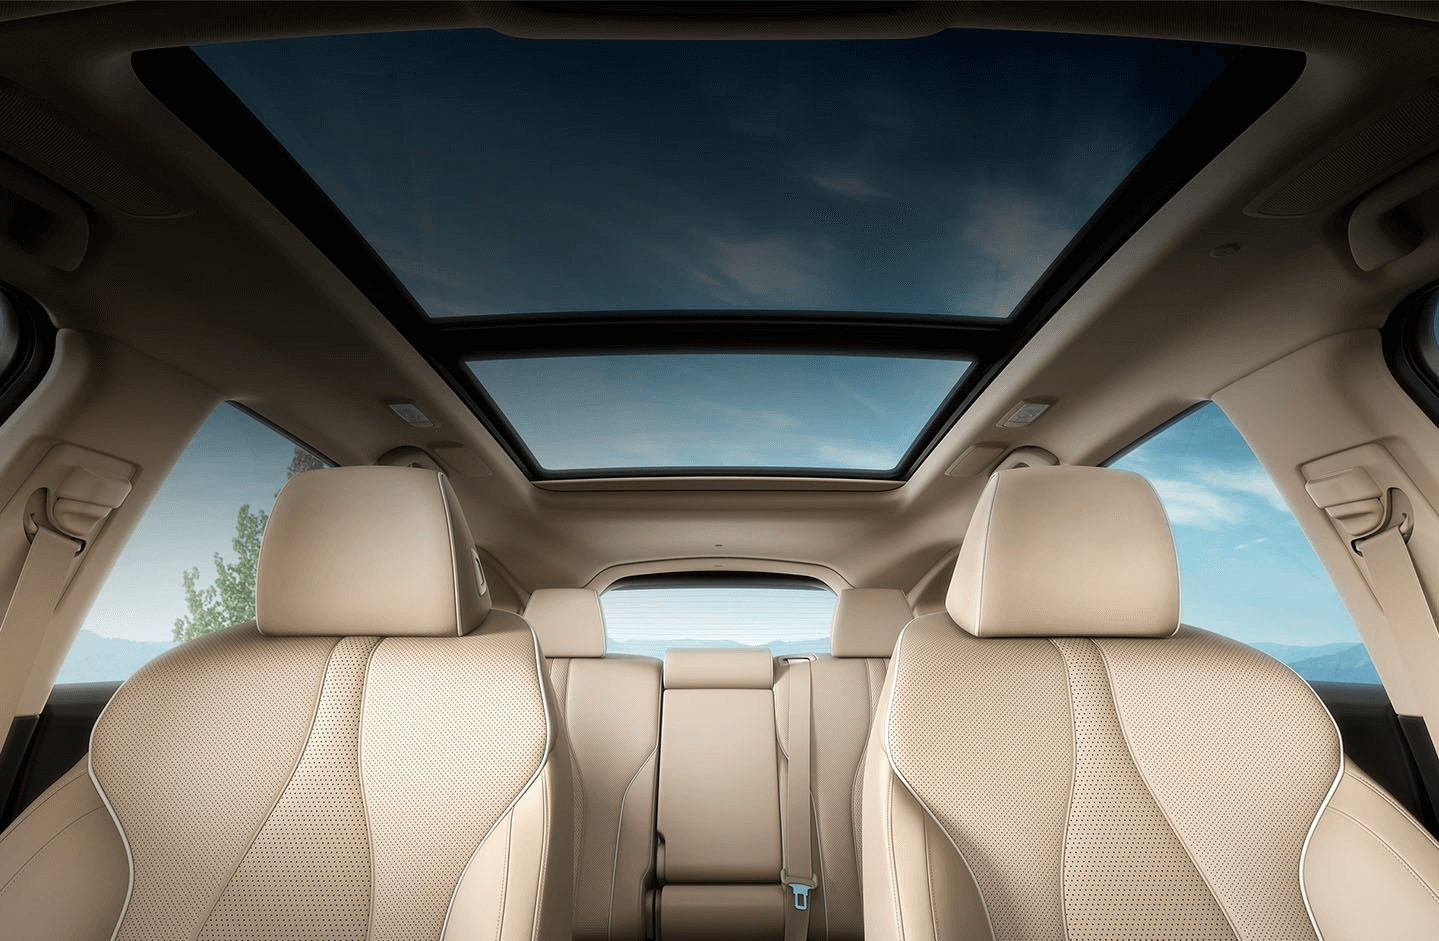 Their vehicles offer a panoramic sunroof